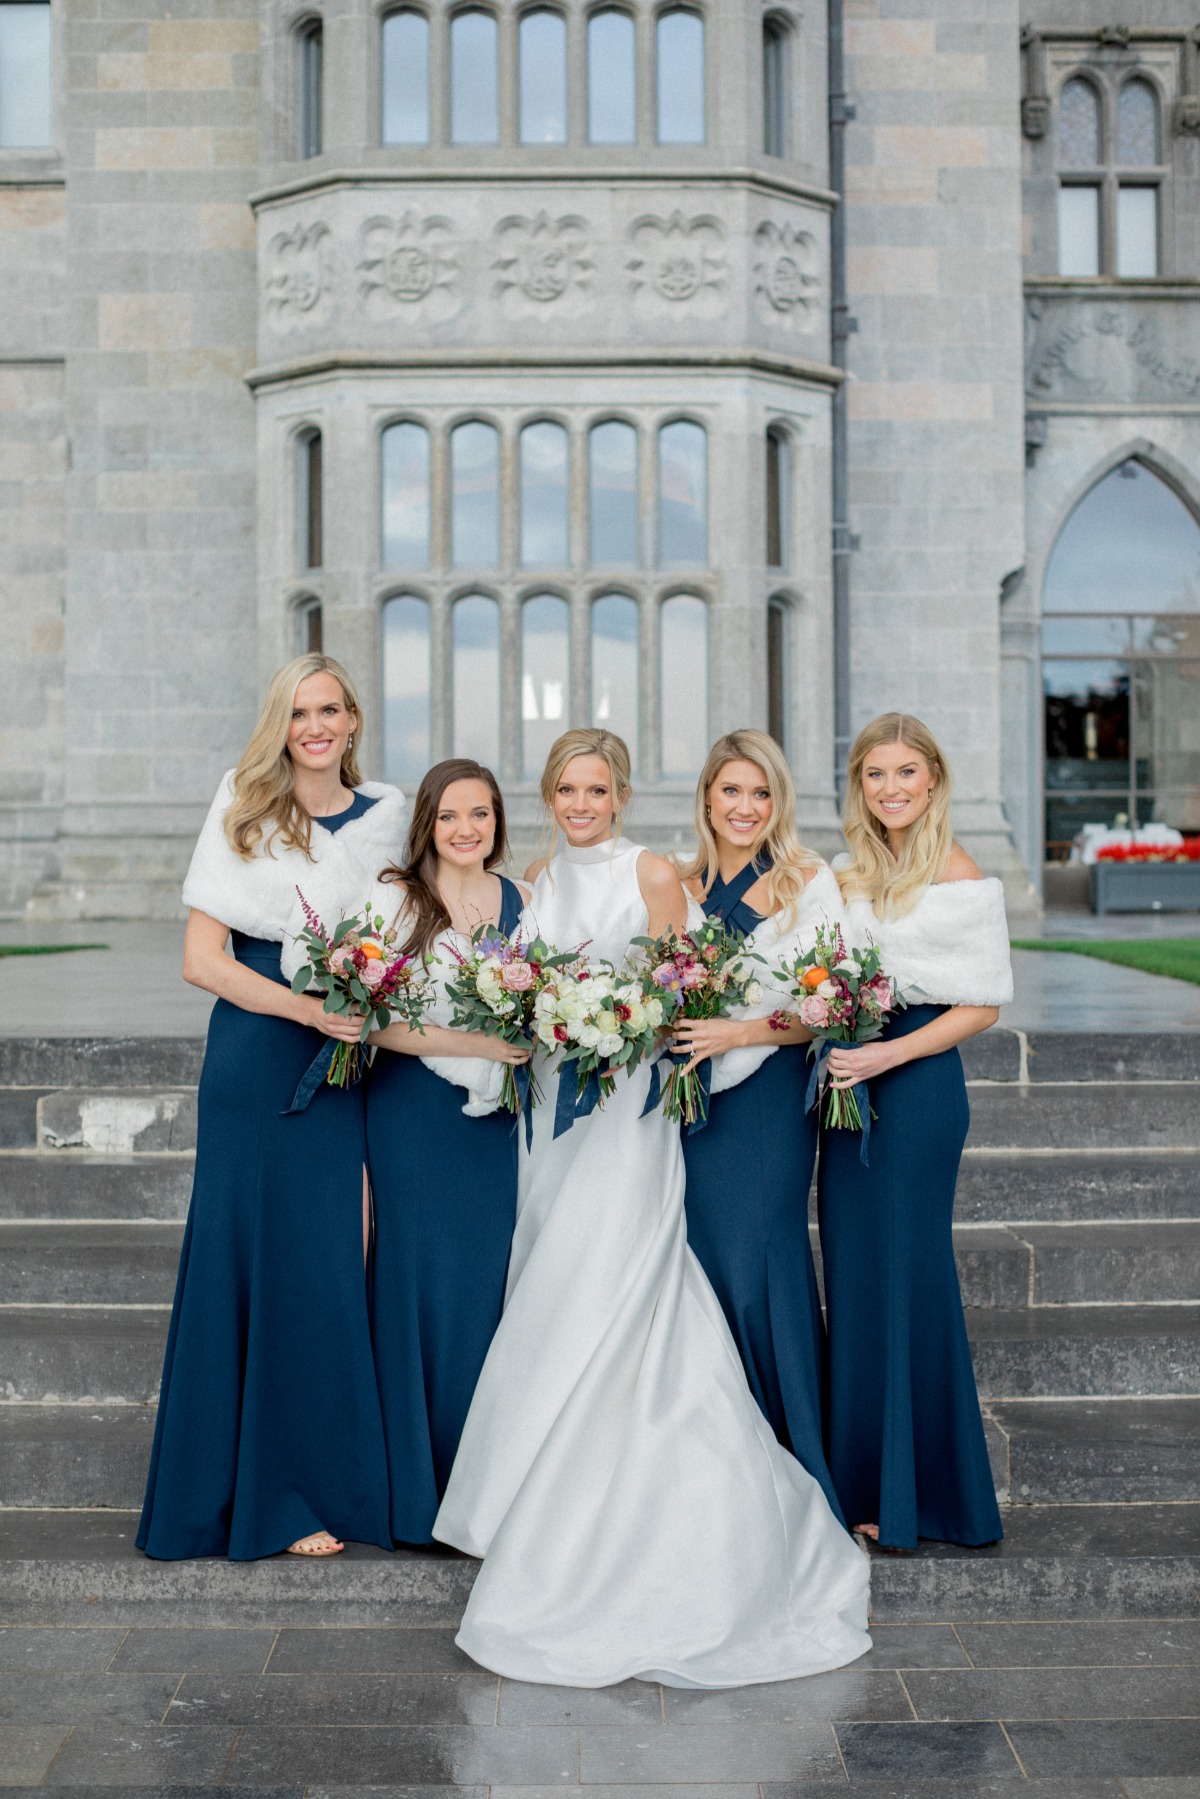 Navy Blue Bridesmaid dresses from Jenny Yoo paired with white fur stoles